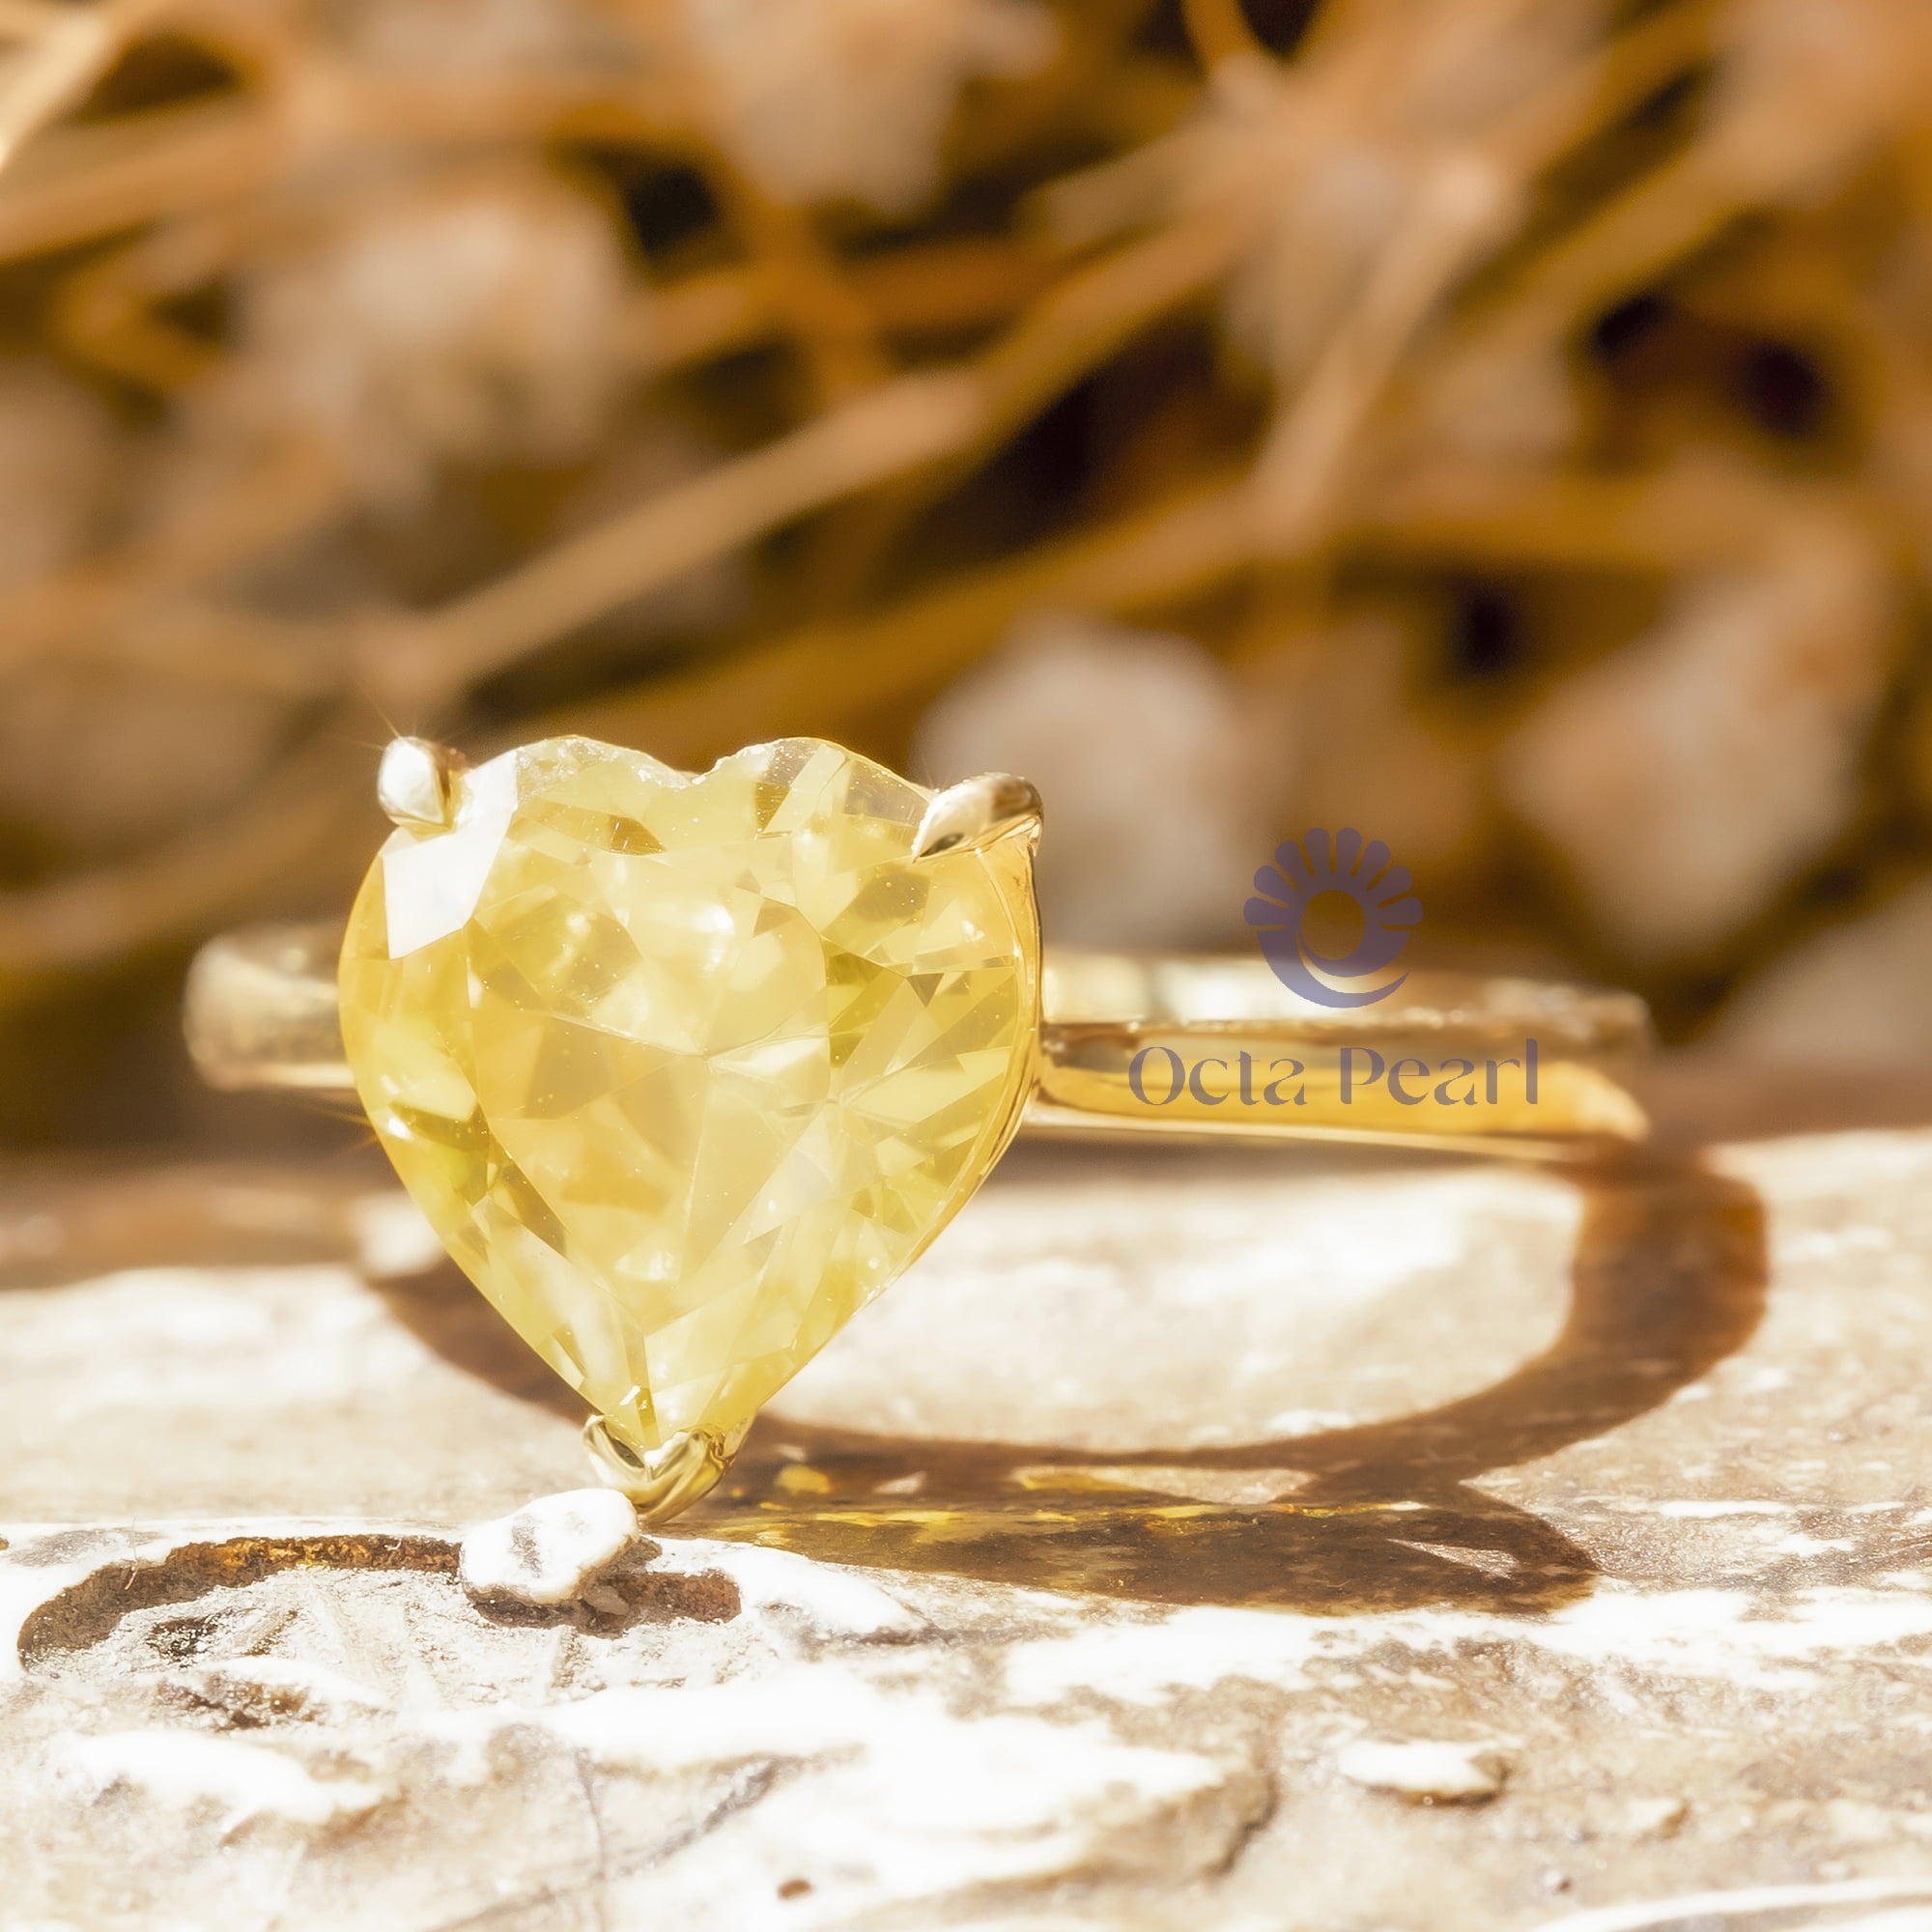 3-Prong Set Yellow Heart Cut CZ Stone Solitaire Engagement Wedding Ring (3 1/2 TCW)